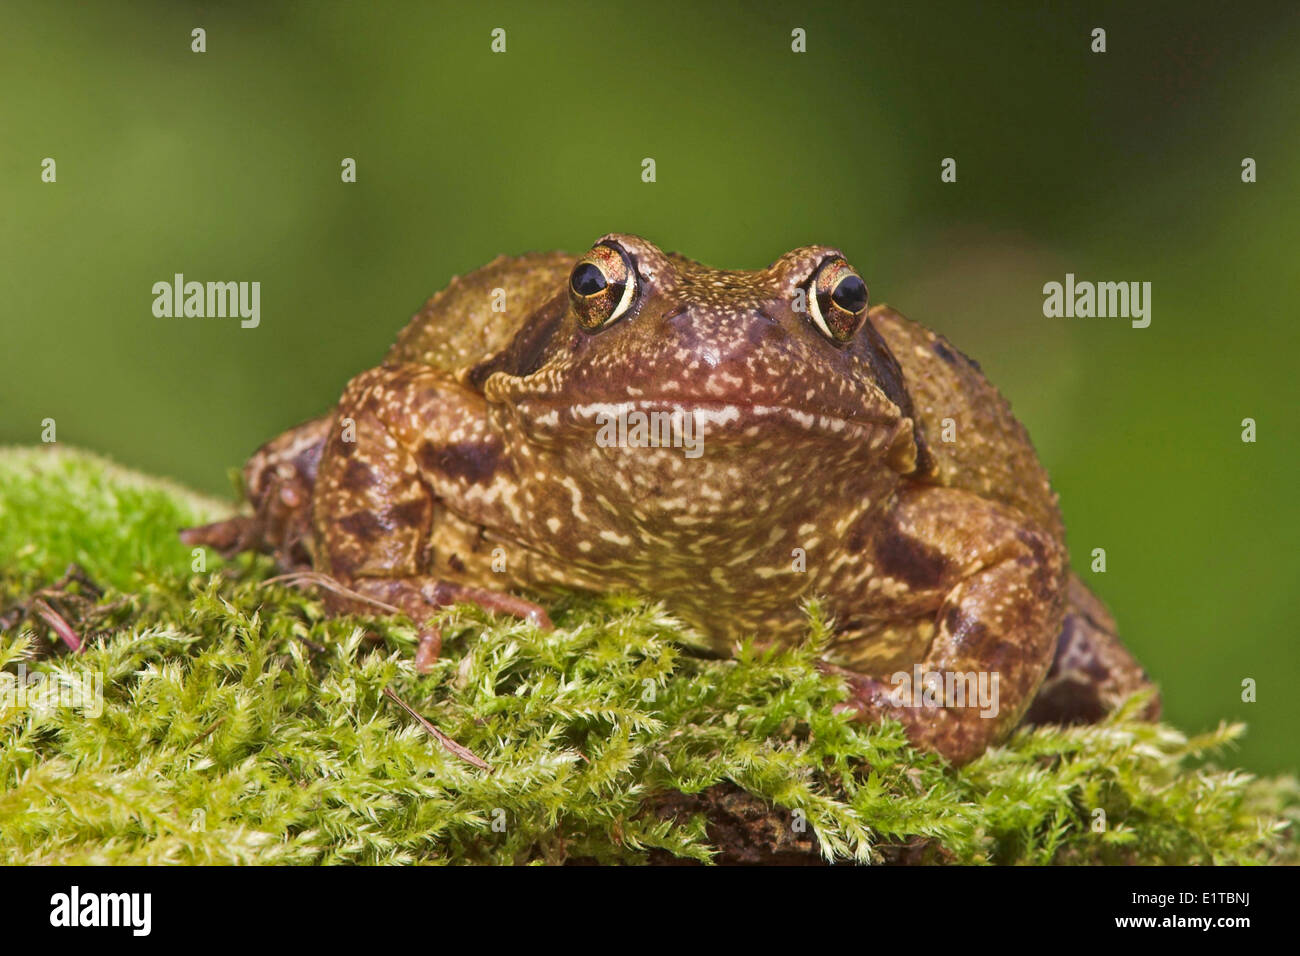 frontal portrait of a big female common frog on green moss with a green background Stock Photo